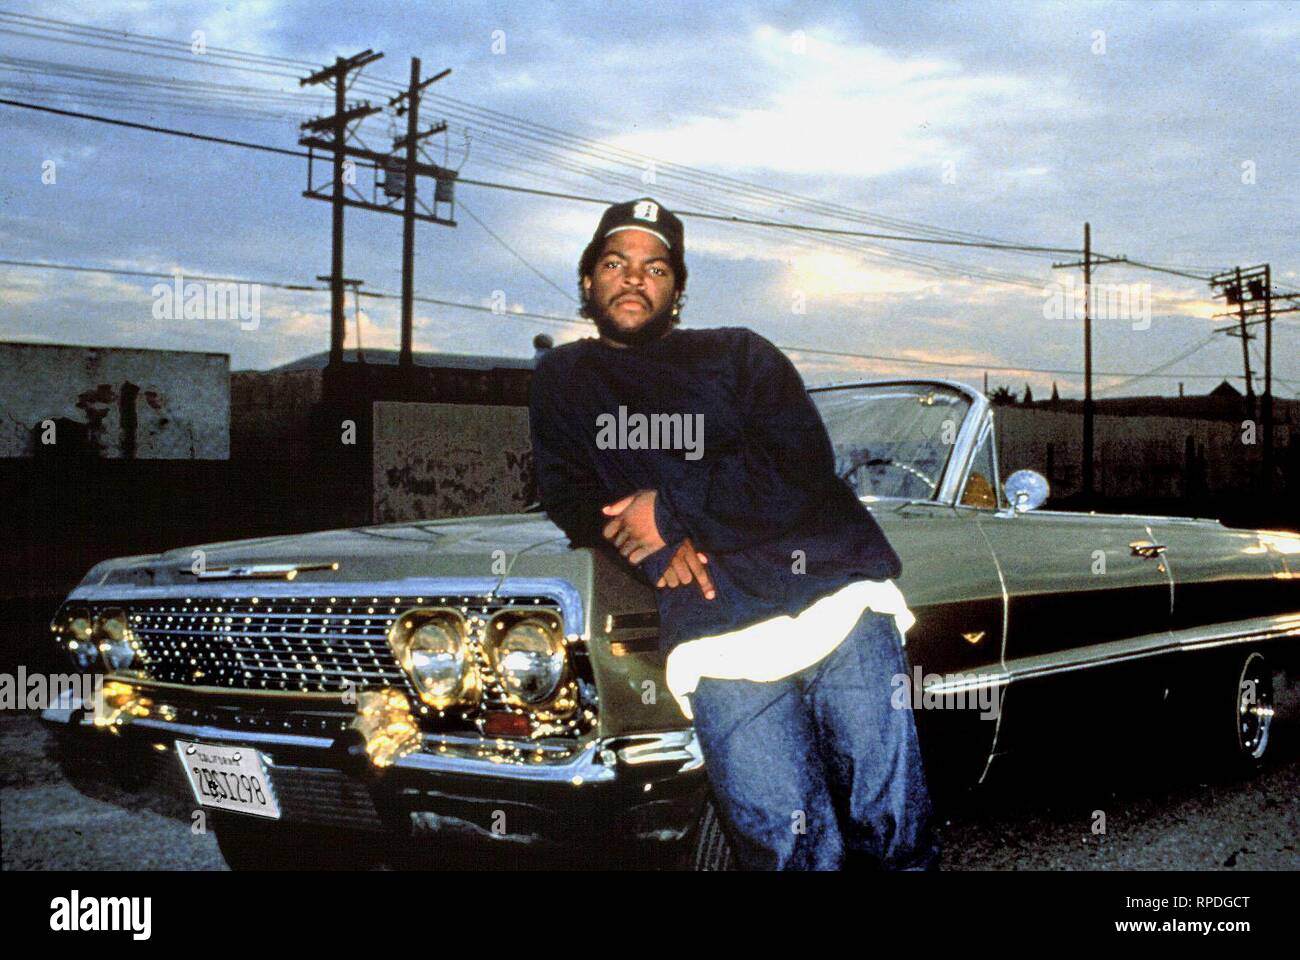 Ice cube you know how